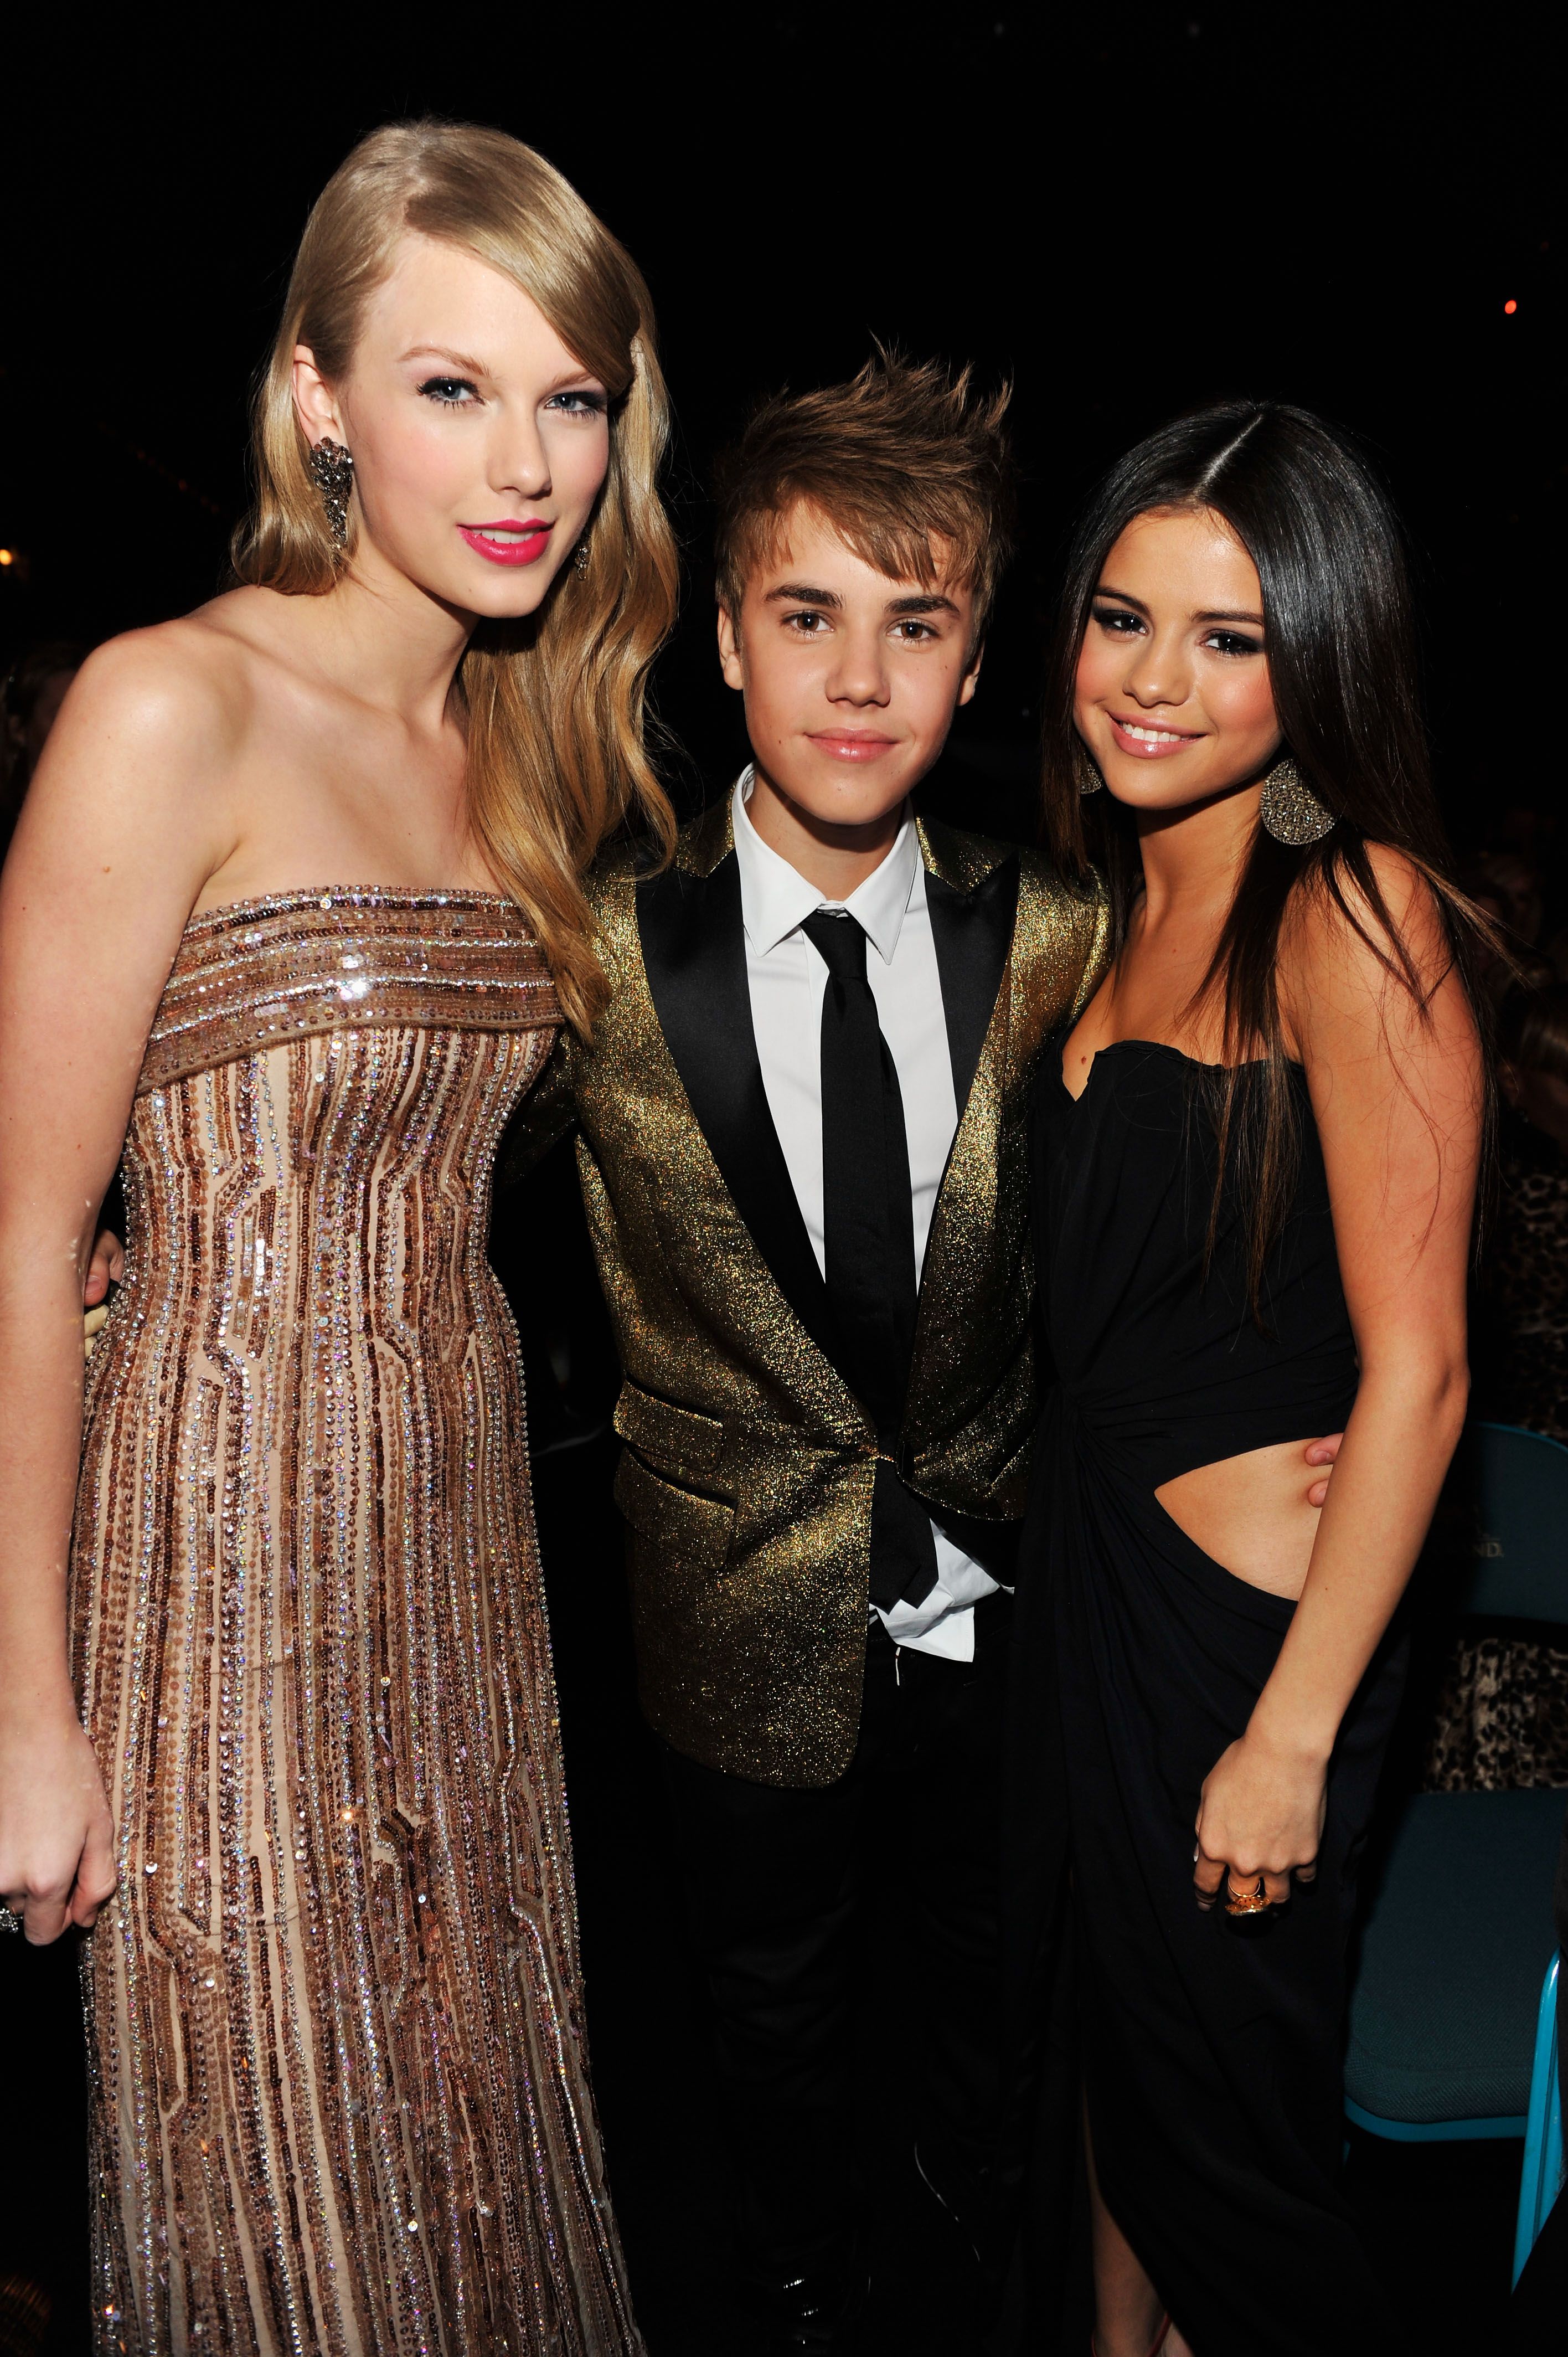 Taylor Swift Confirms Justin Bieber Cheated On Selena Gomez photo picture